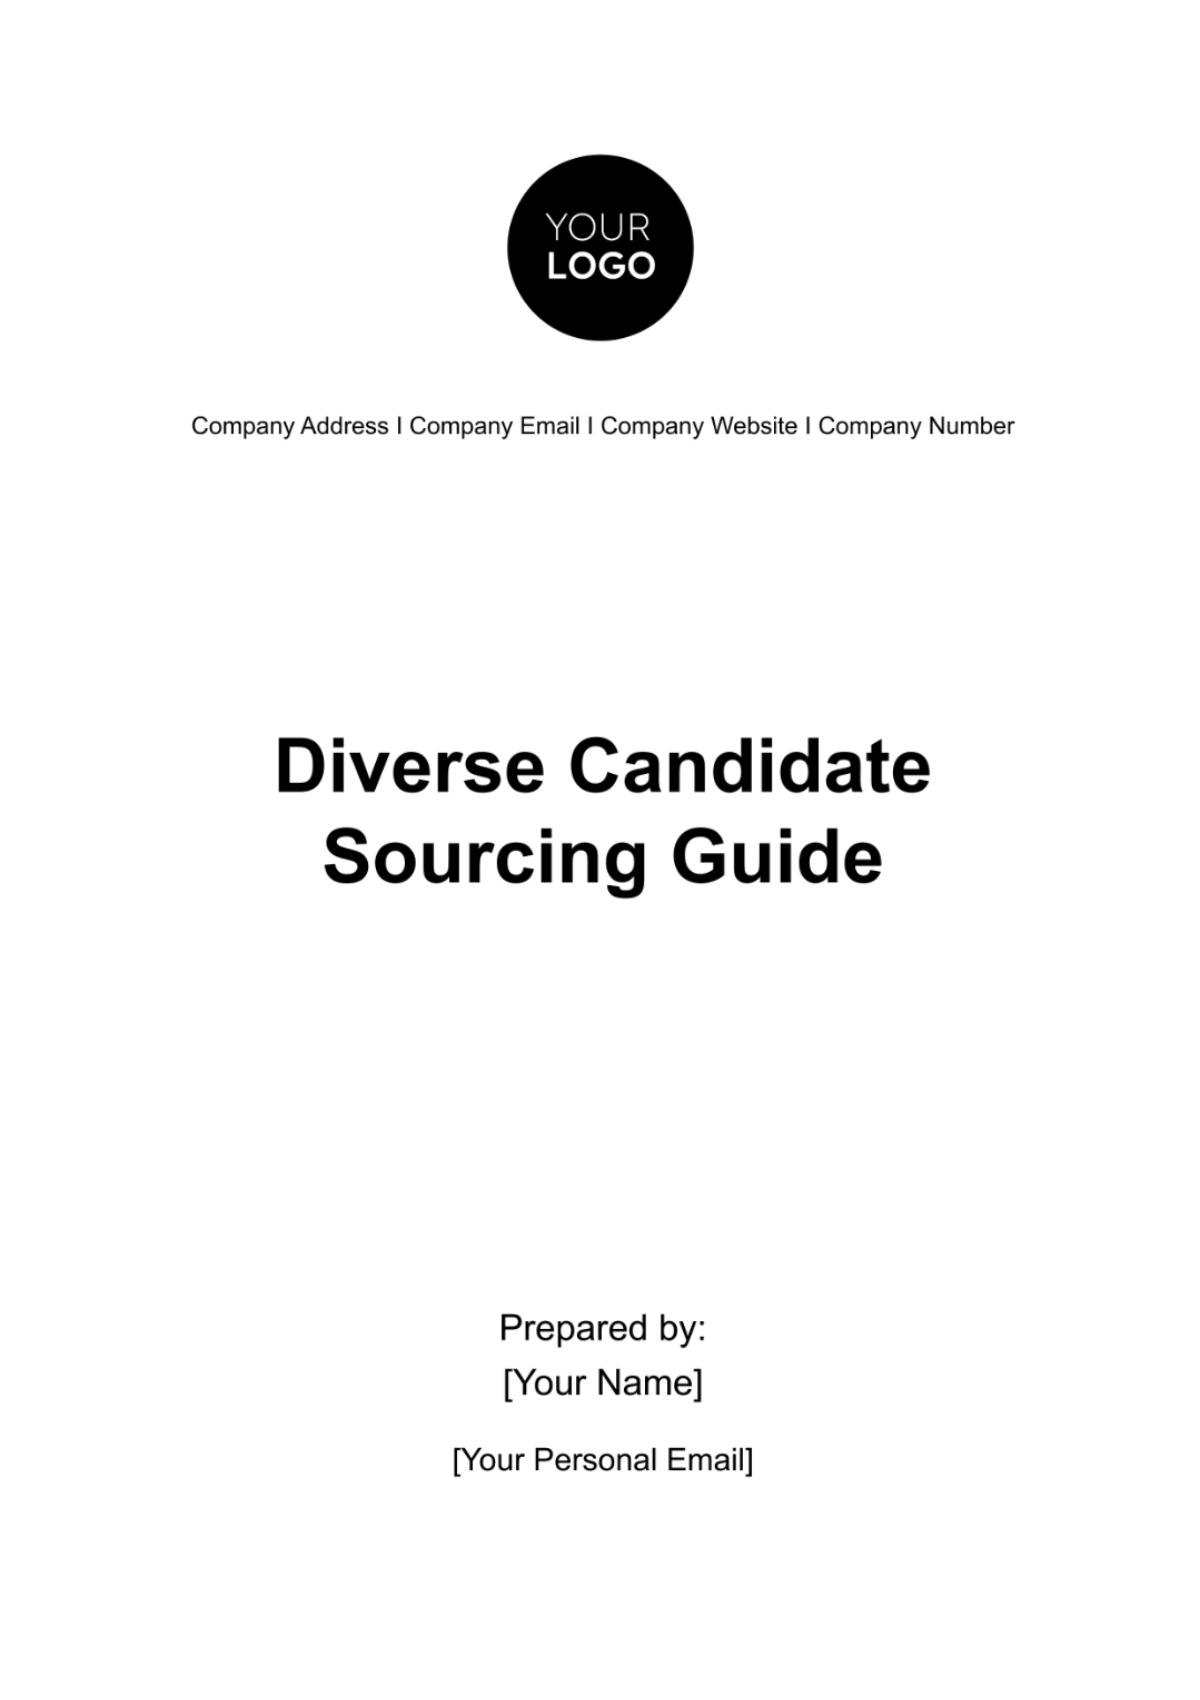 Free Diverse Candidate Sourcing Guide HR Template